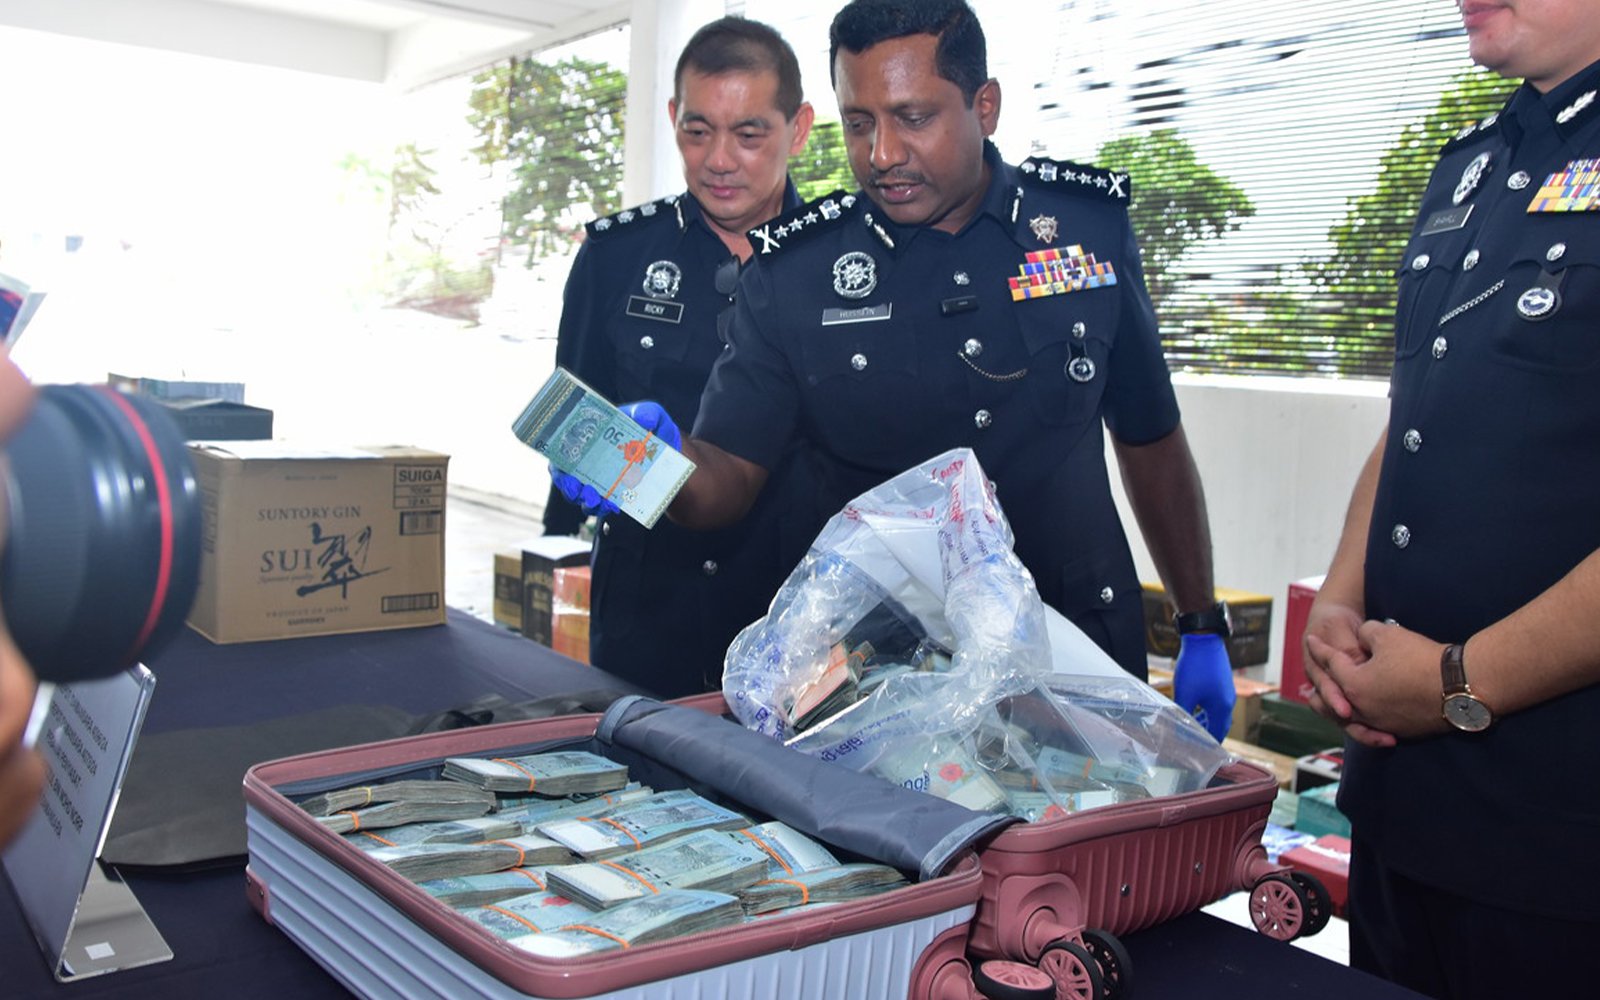 trio to provide statements to police over suitcase with rm500,000